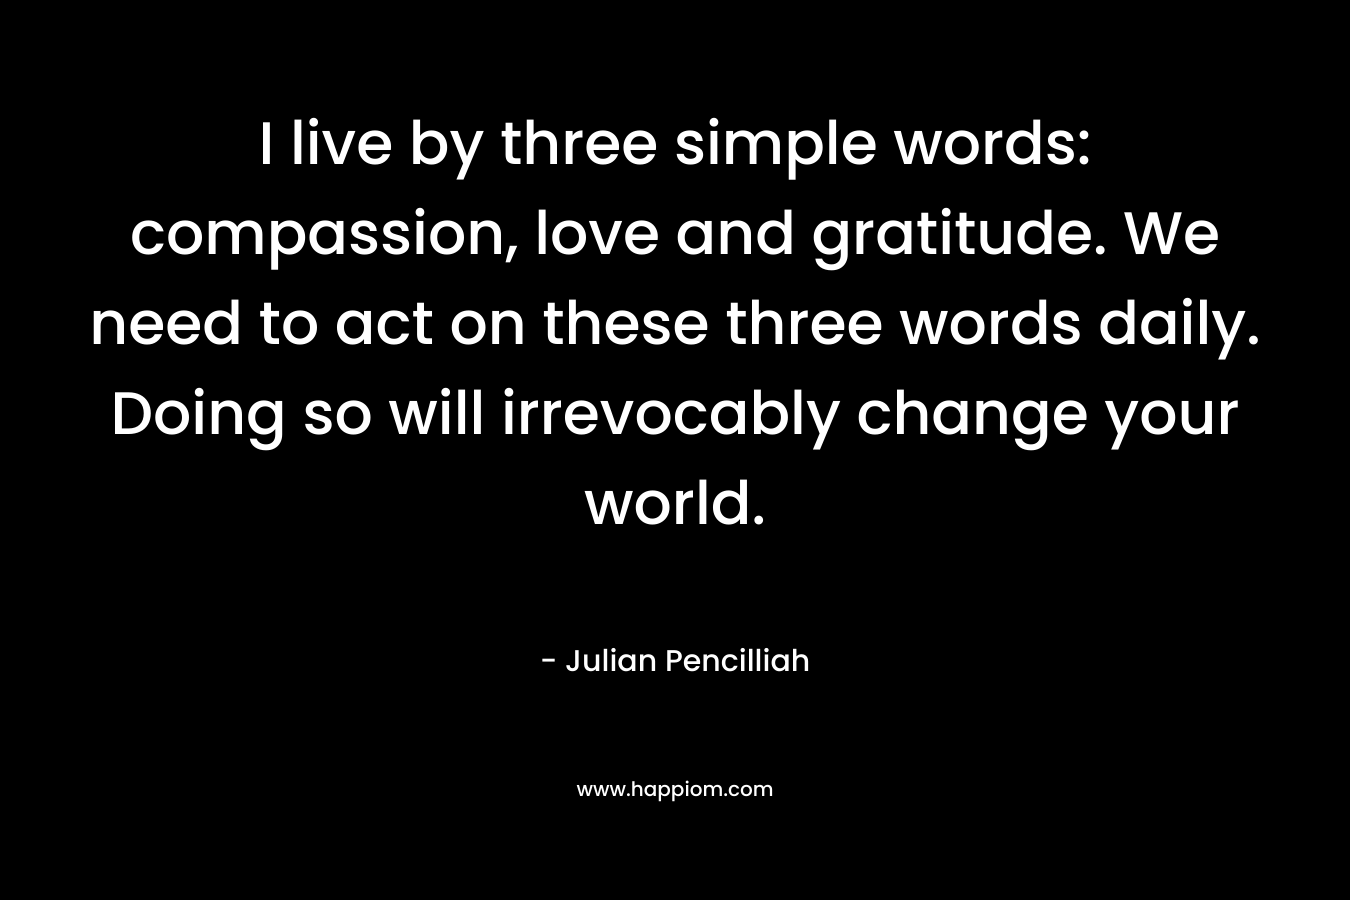 I live by three simple words: compassion, love and gratitude. We need to act on these three words daily. Doing so will irrevocably change your world.